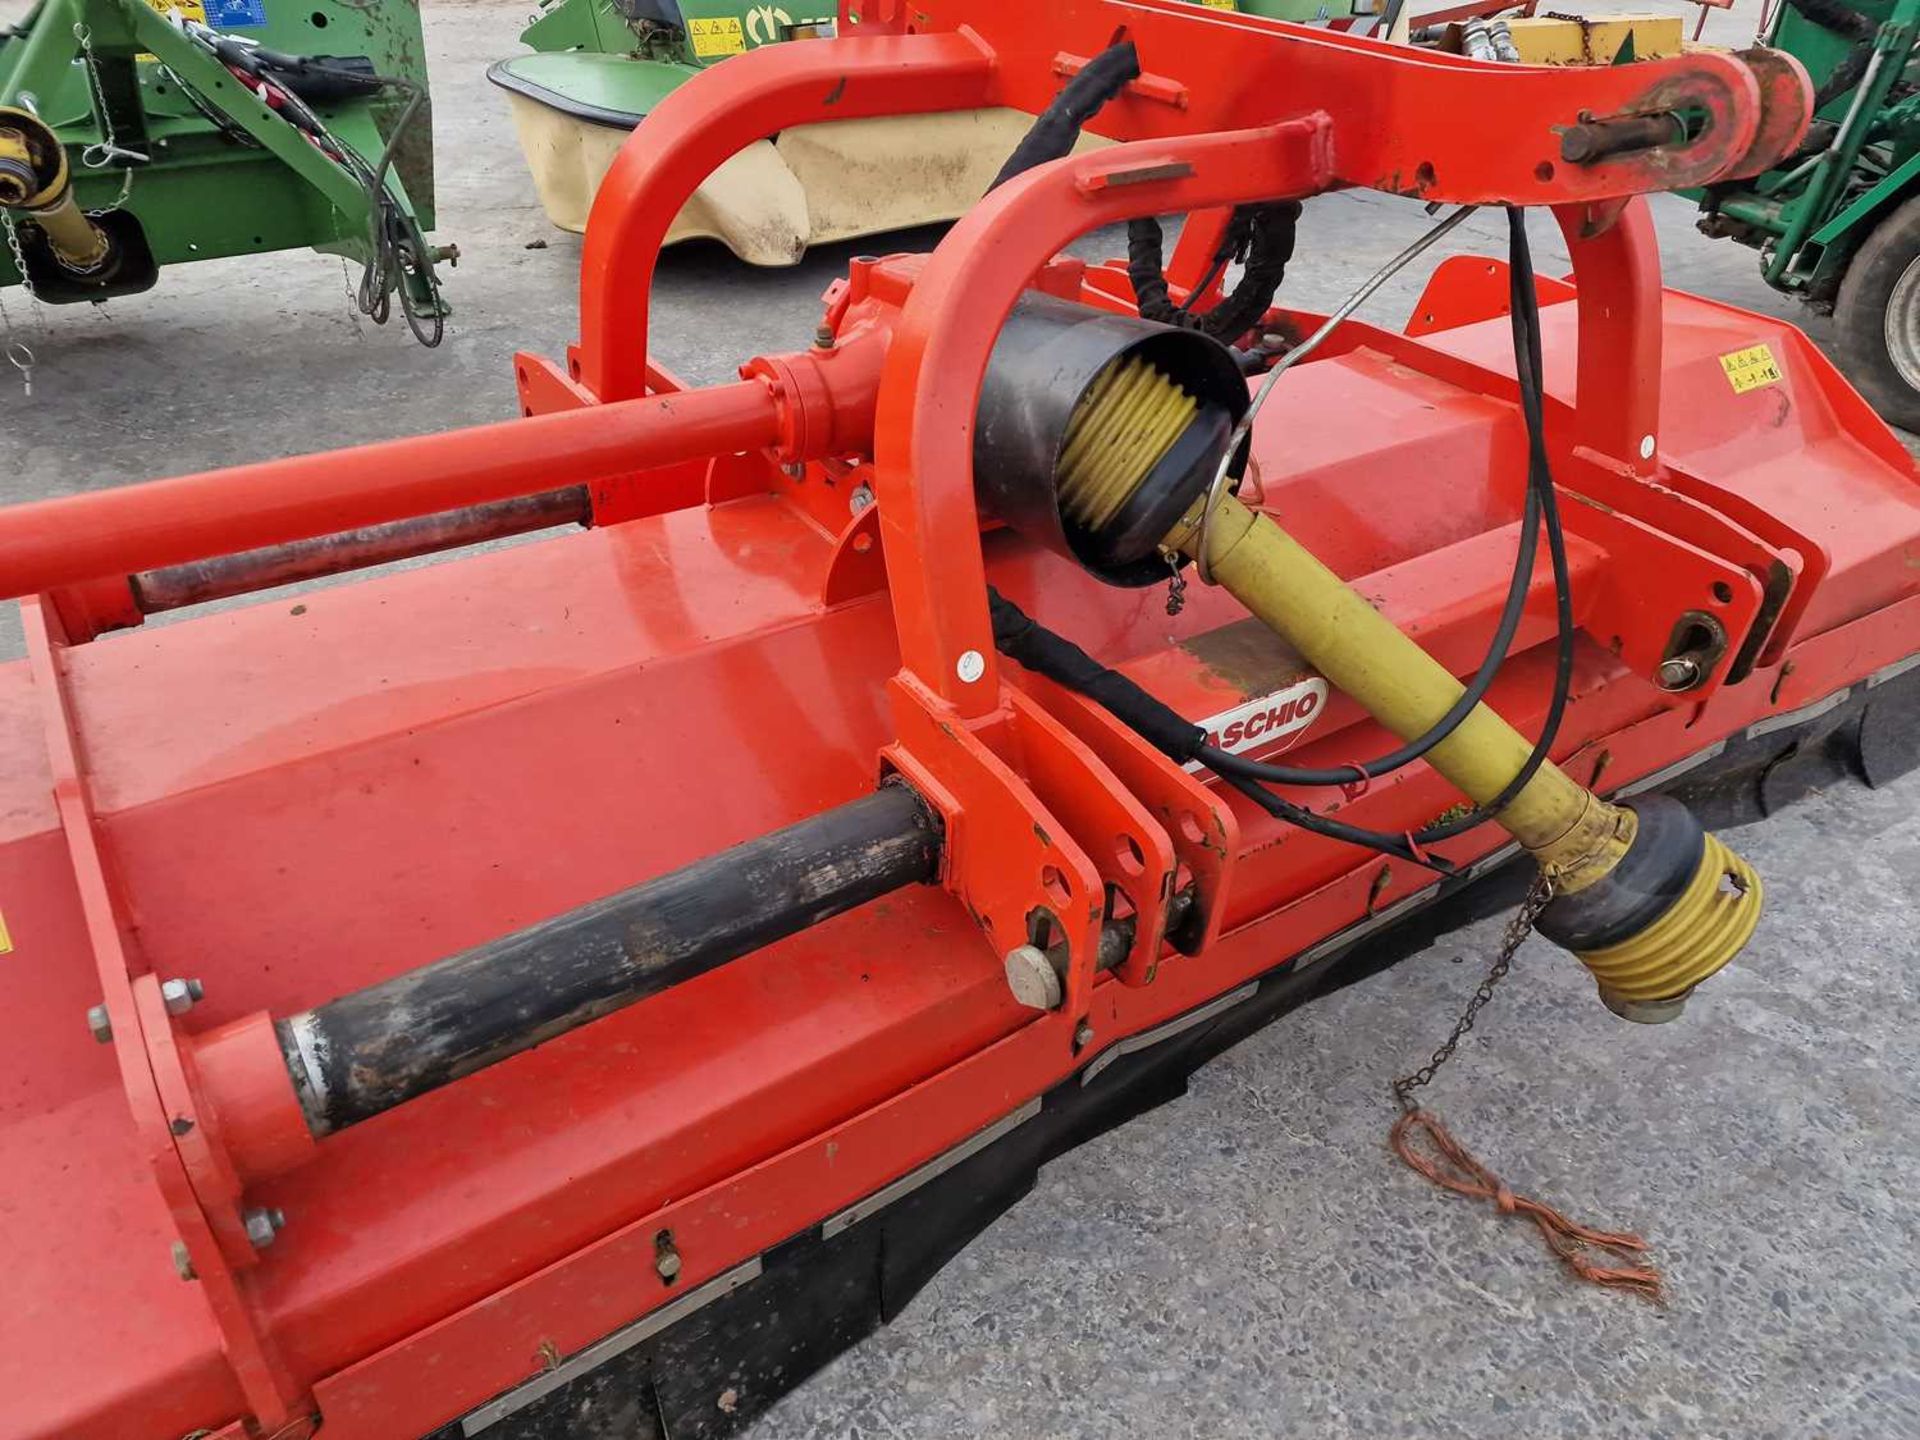 2018 Maschio Bufalo 280 PTO Driven Topper, Side Shift to suit 3 Point Linkage - Image 6 of 11